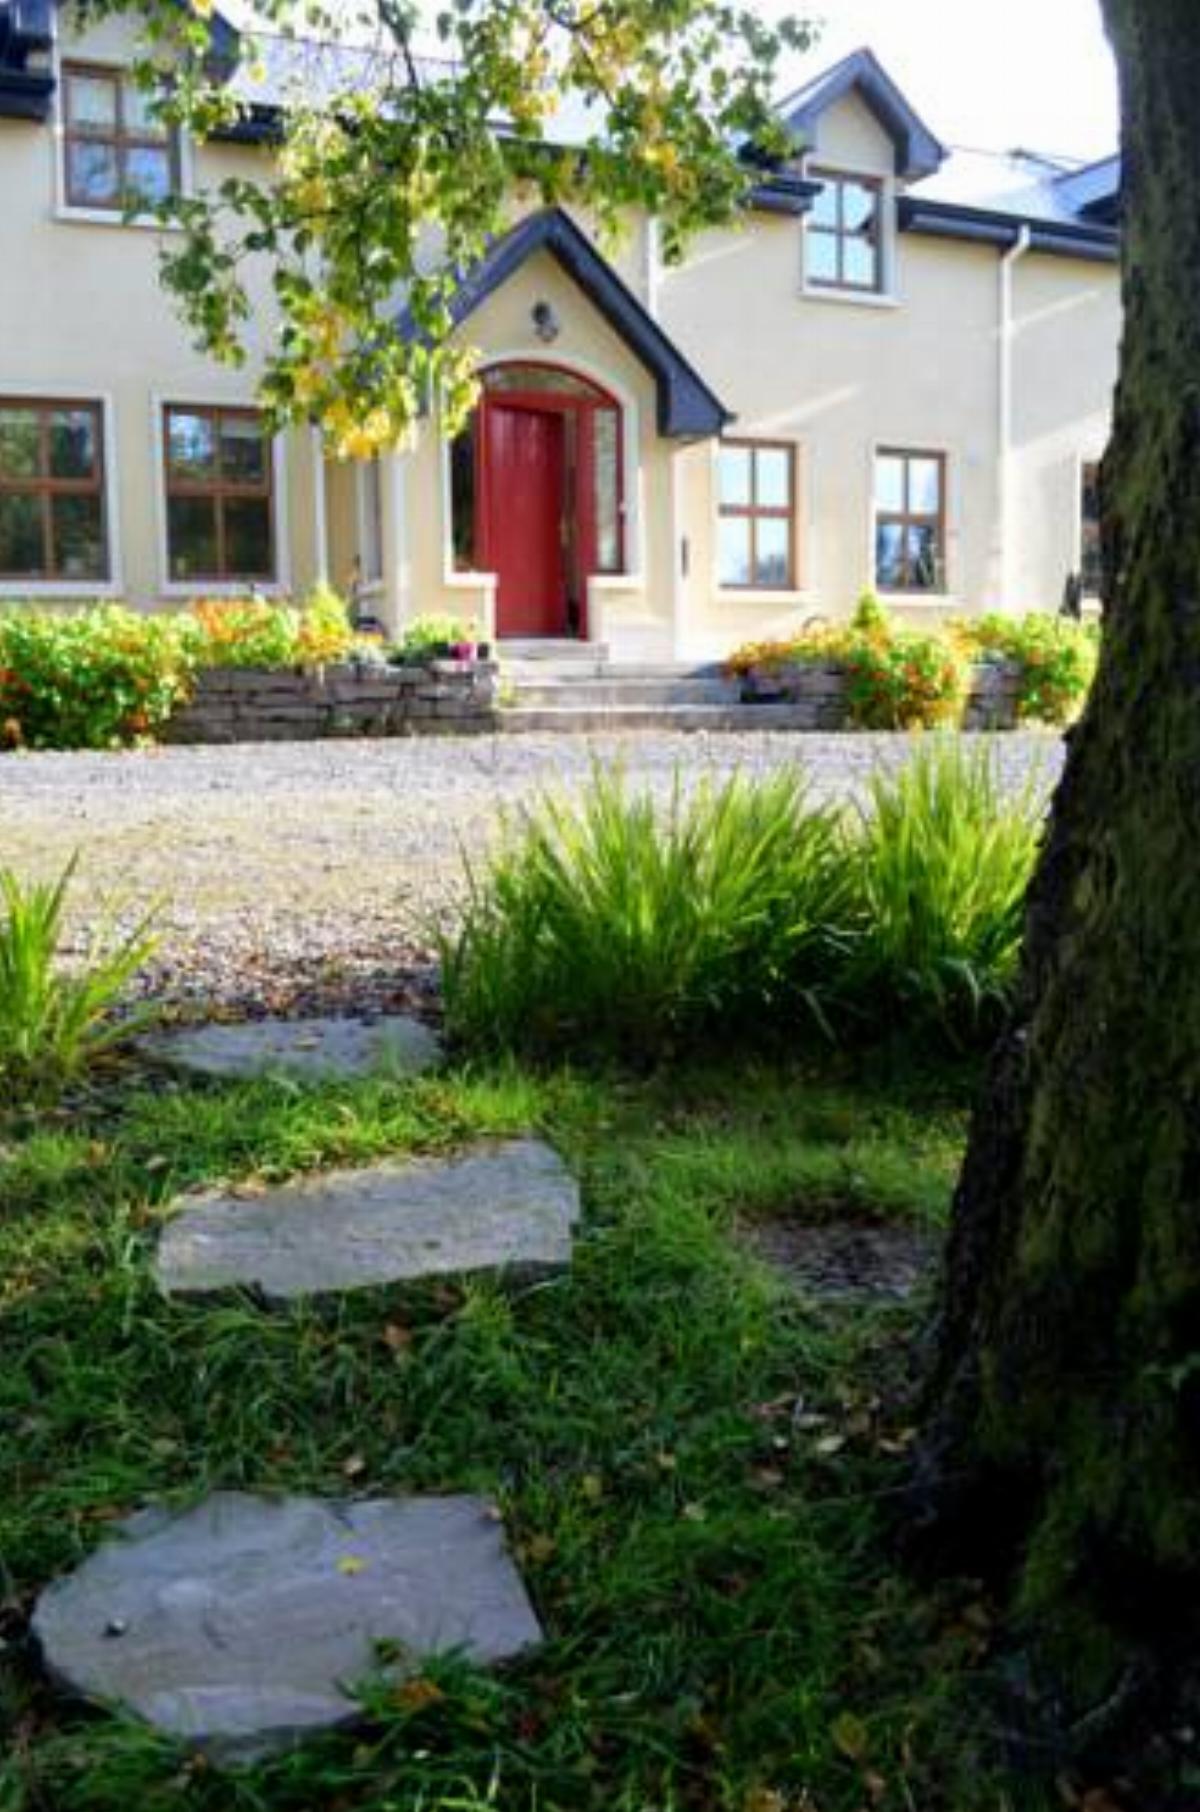 Moy River Bed and Breakfast Hotel Cloonacool Ireland